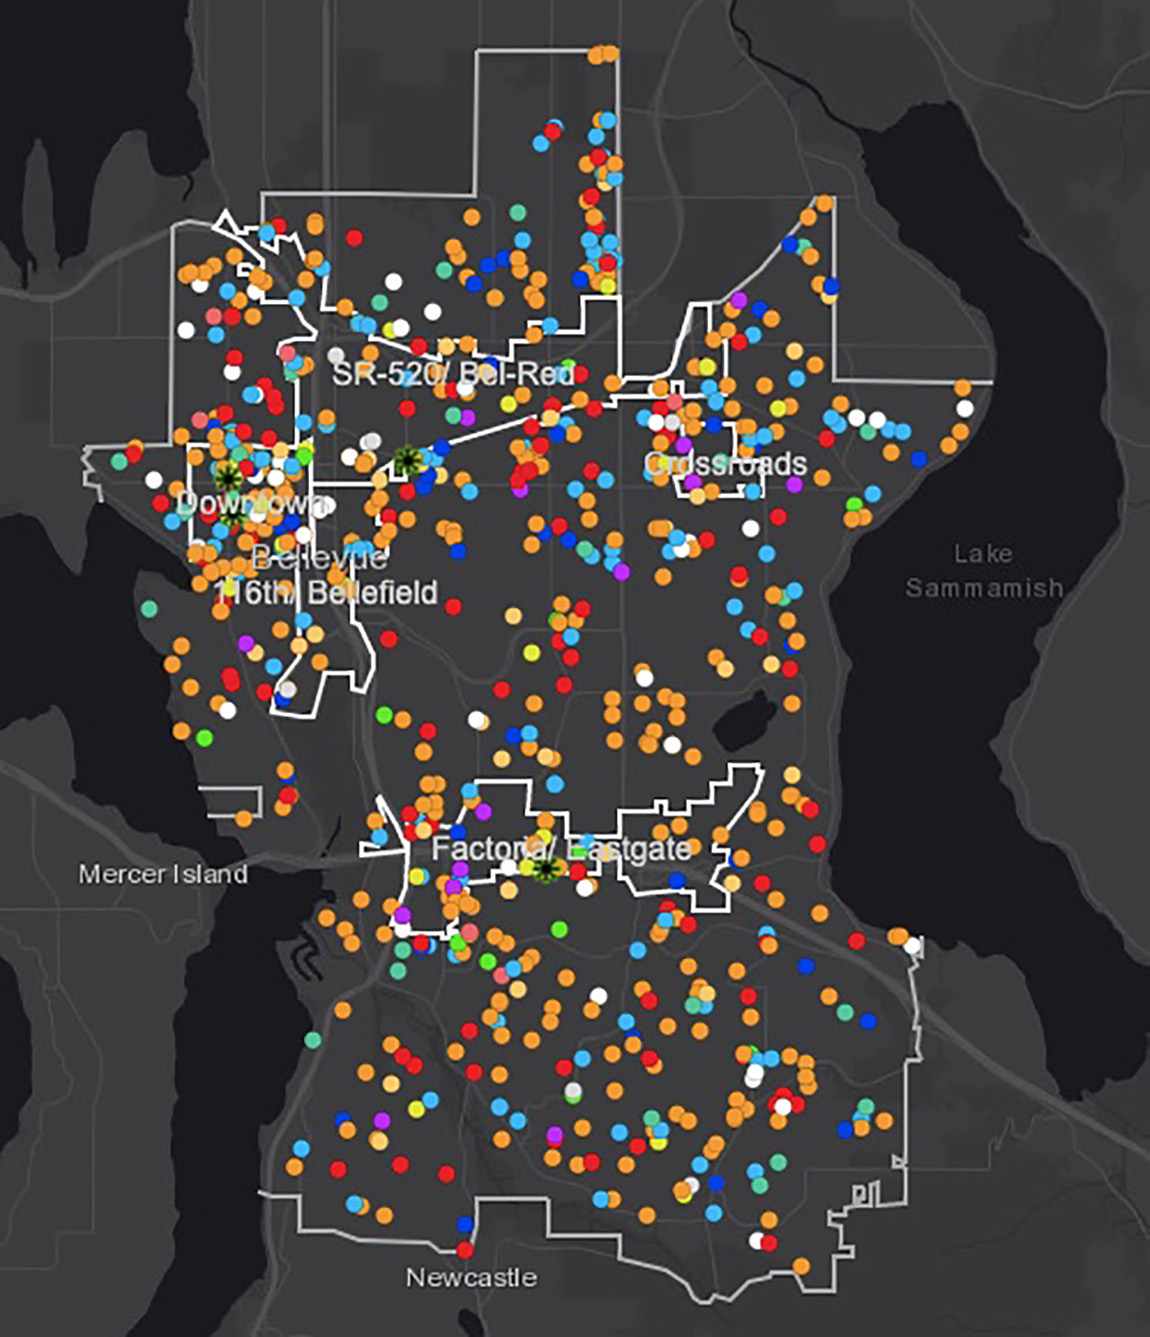 Map of Seattle’s Eastside showing tech start-ups. http://cobgis.maps.arcgis.com/apps/MapSeries/index.html?appid=7453faf396f144798372f3ef0fd90fc2.